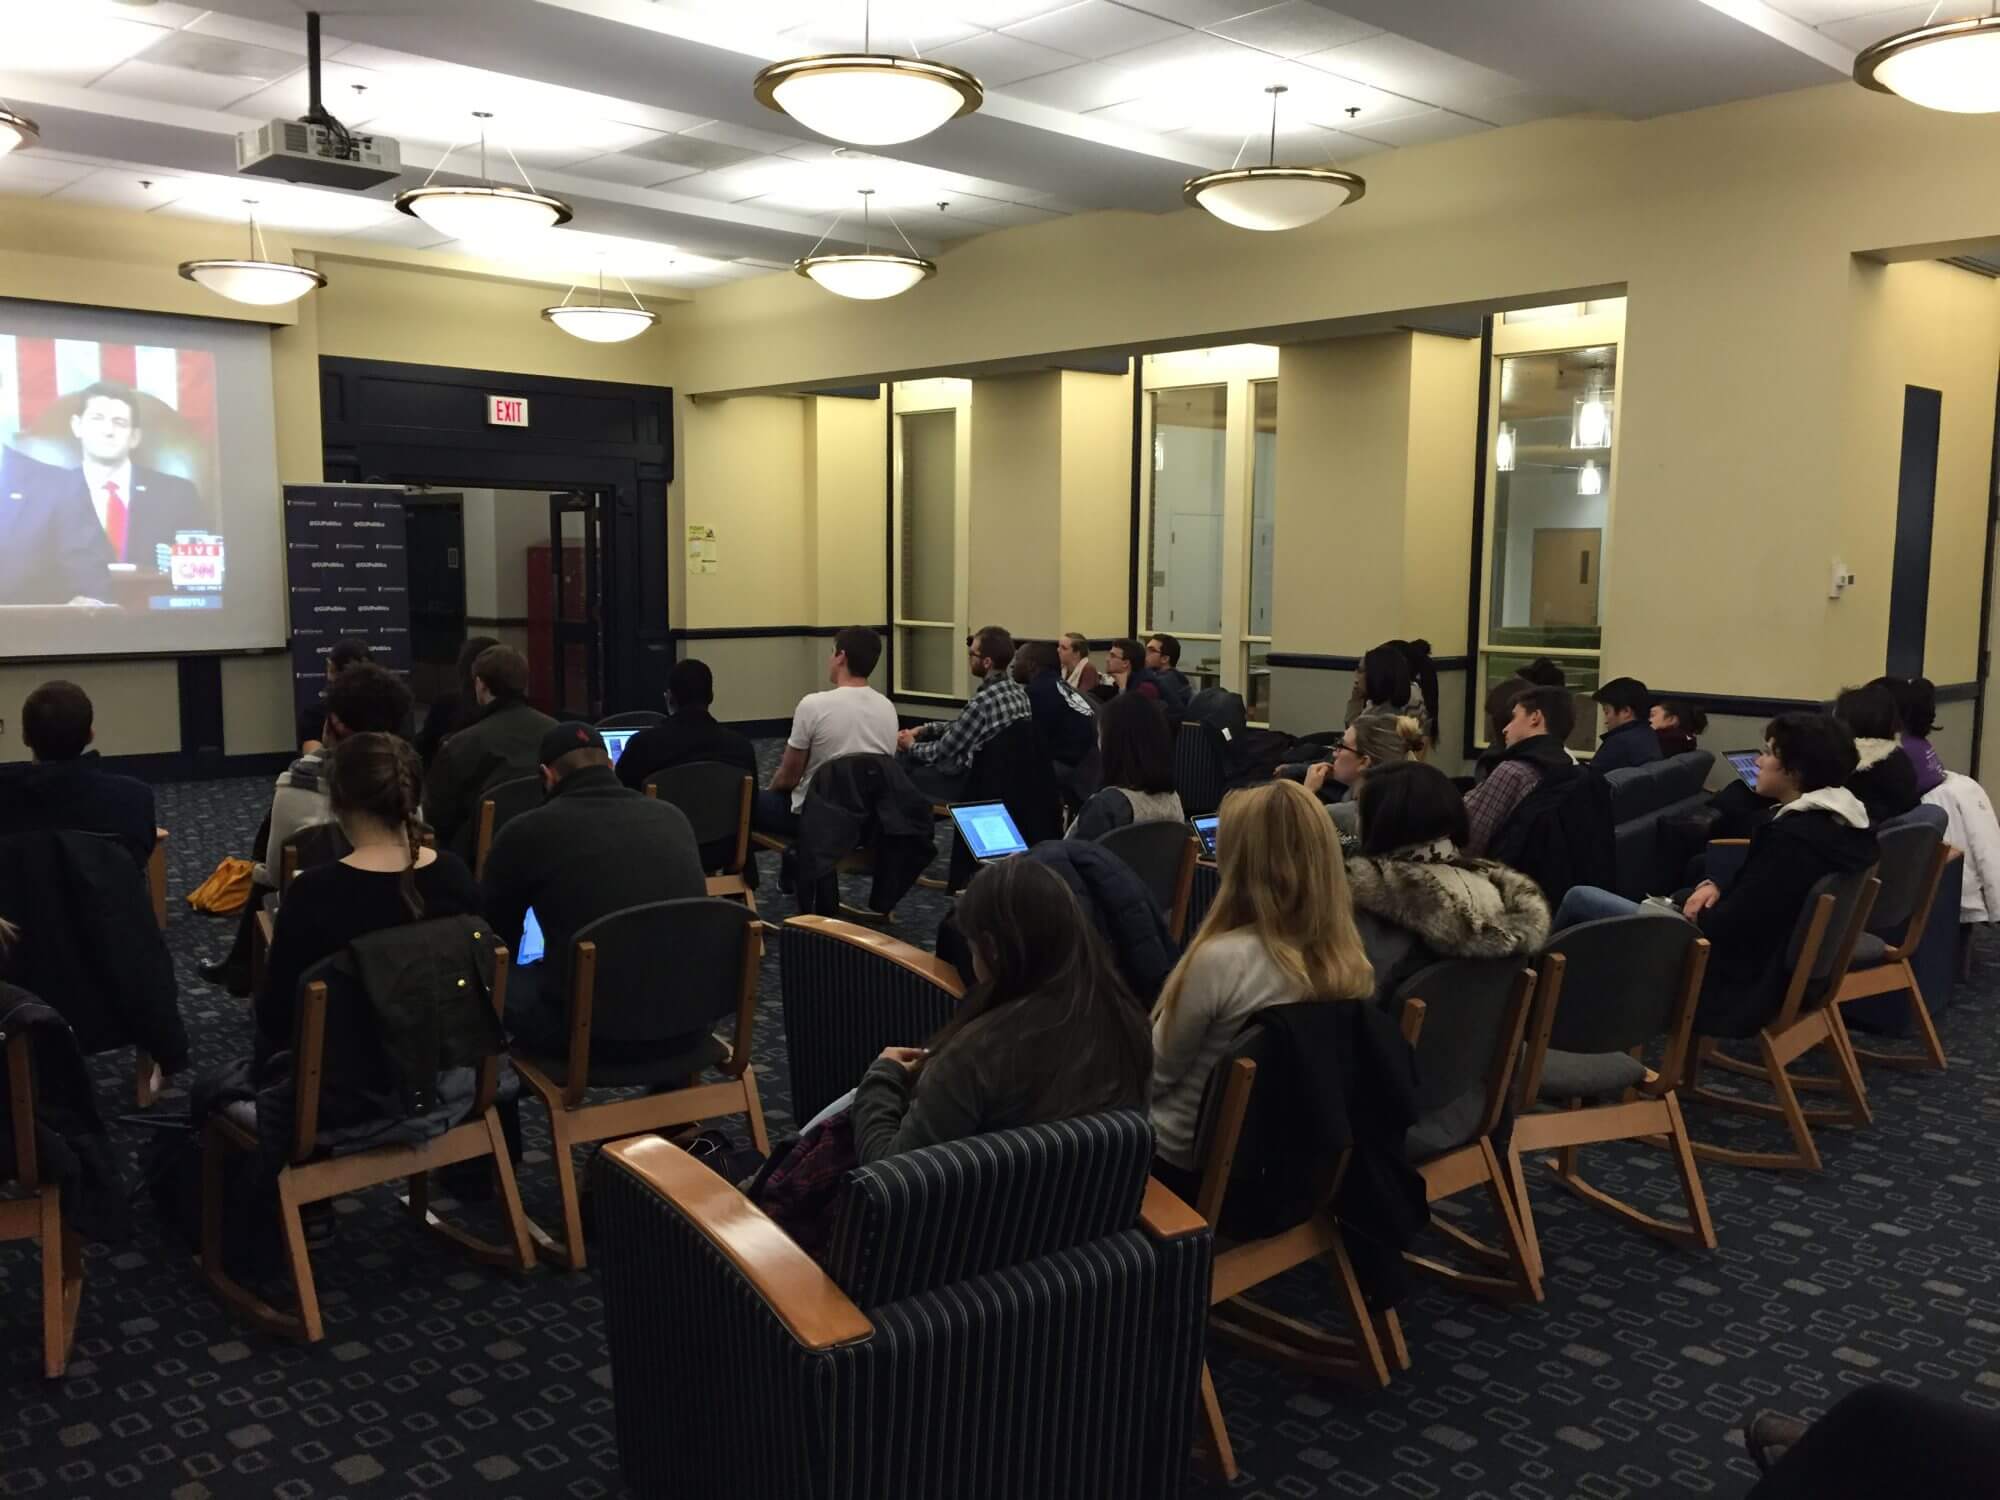 Obama speech met with stoic response from Georgetown students